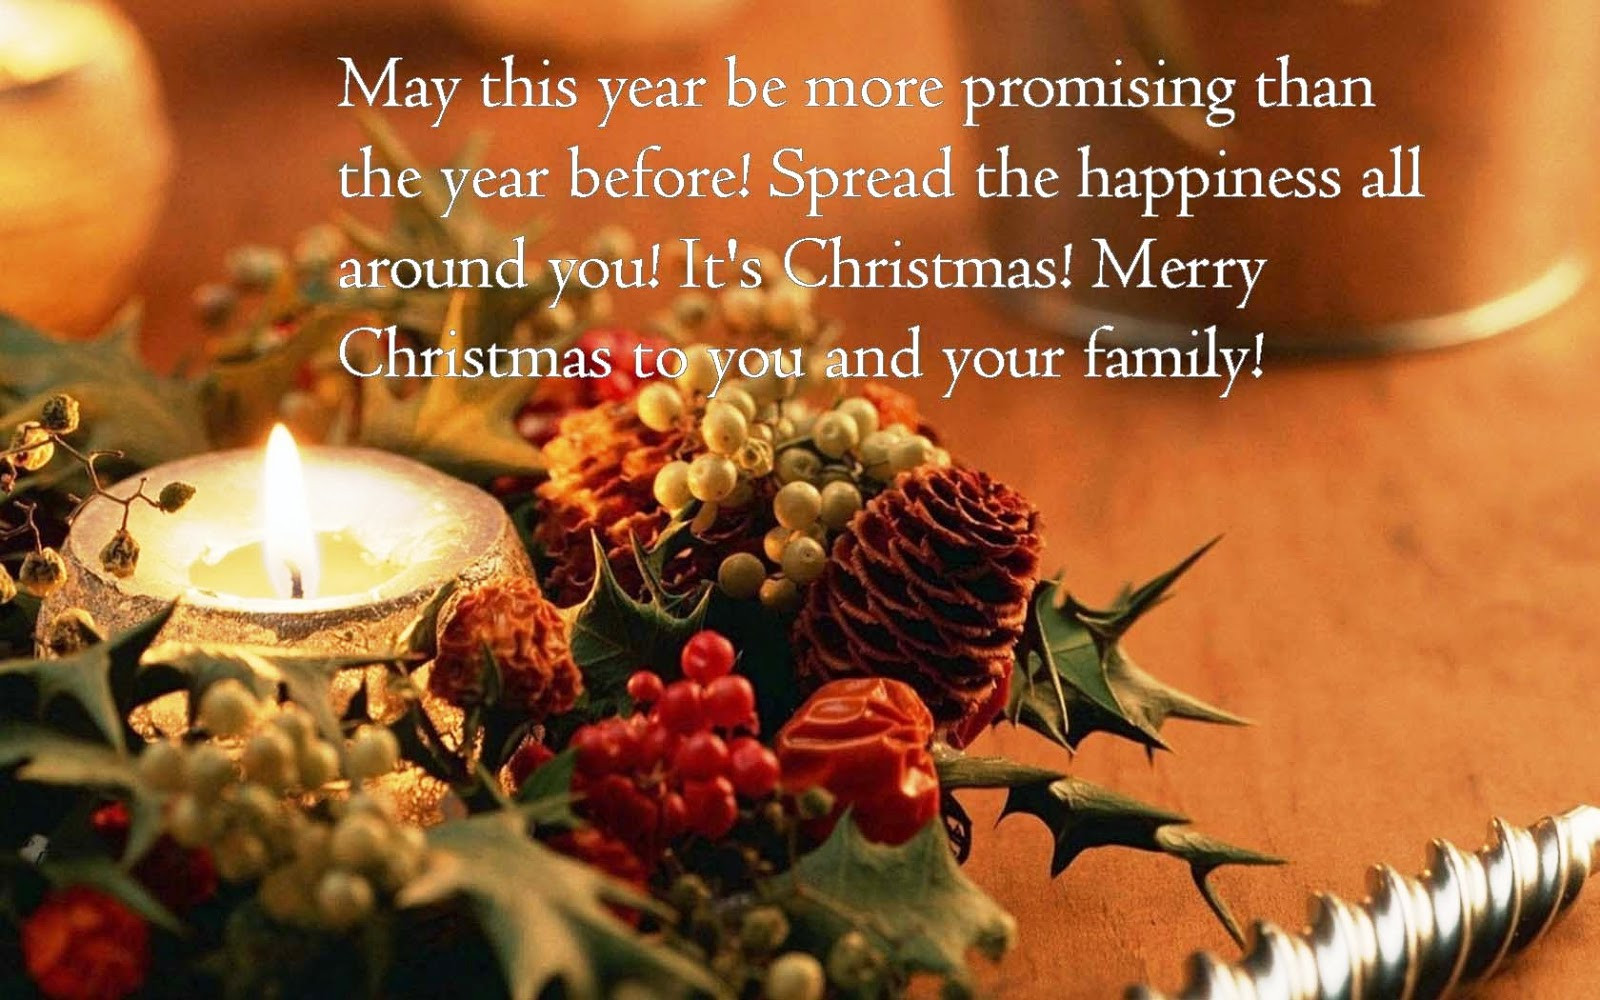 Merry Christmas Images And Quotes
 Merry Christmas 2015 Wishes Quotes Cards and Songs